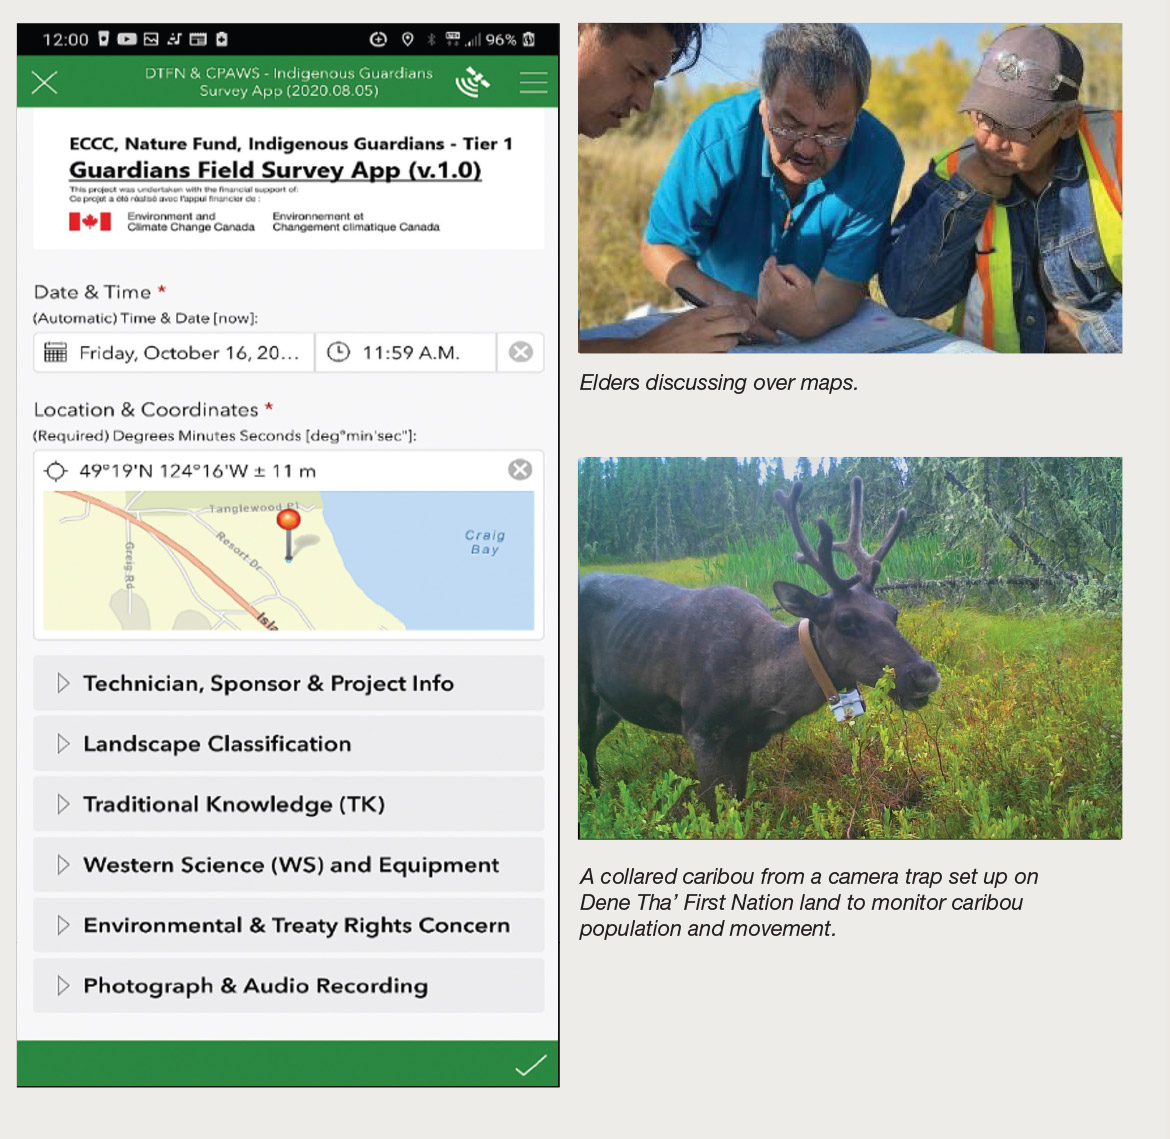 This image features two pictures, the first one showing three Indigenous elders discussing over maps in a natural environment, and the second one showing a collared caribou in a natural forested environment taken from a camera trap set up on Dene Tha’ First Nation land to monitor caribou population and movement. This image also features the interface of an application (the Guardians Field Survey App (v.1.0)). The interface shows different parts where users can input or visualize information (Technician, Sponsor and Project Info, Landscape Classification, Traditional Knowledge, Western Science and Equipment, Environmental and Treaty Rights Concern, and Photograph and Audio Recording). The interface also shows a map with specified location and coordinates.